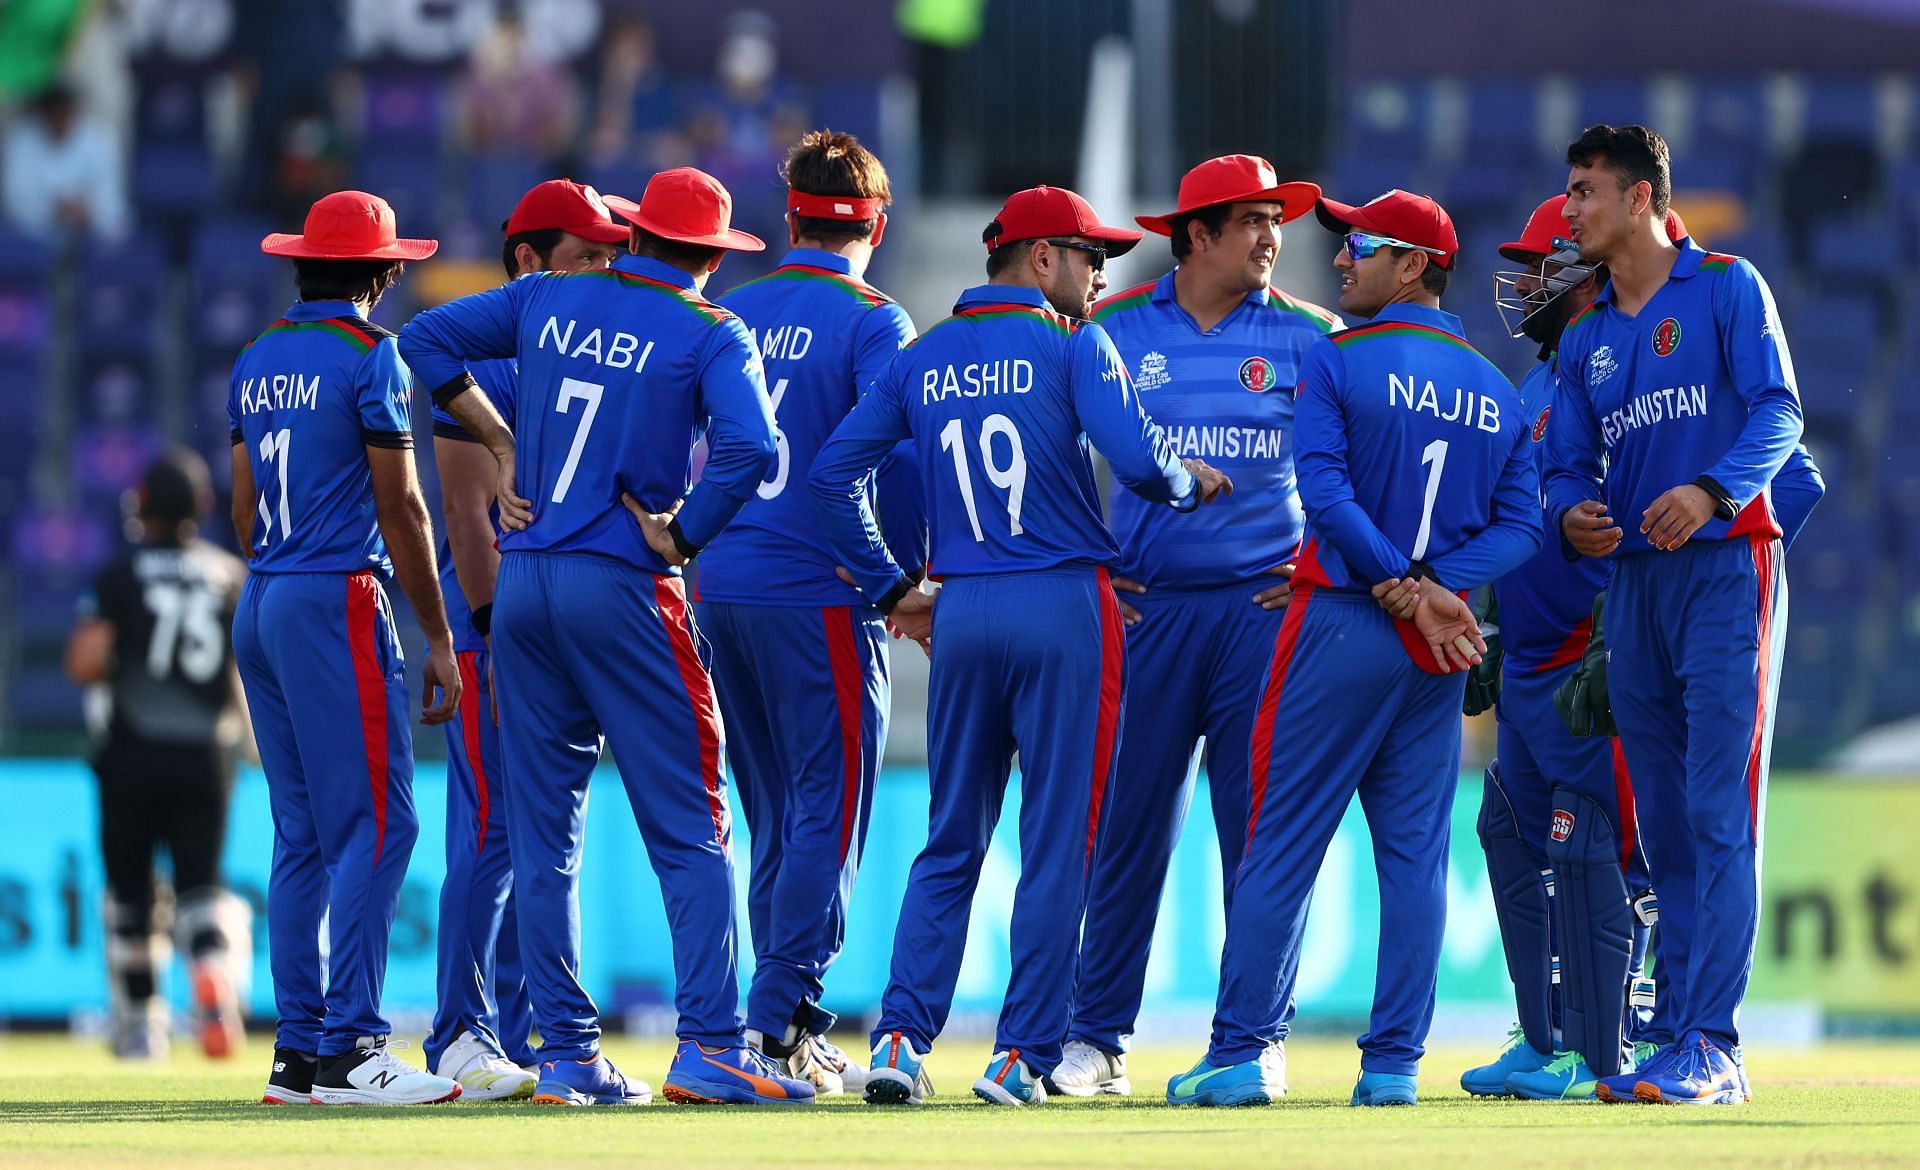 Afghanistan currently lead the series 2-0 (Credit: Getty Images)